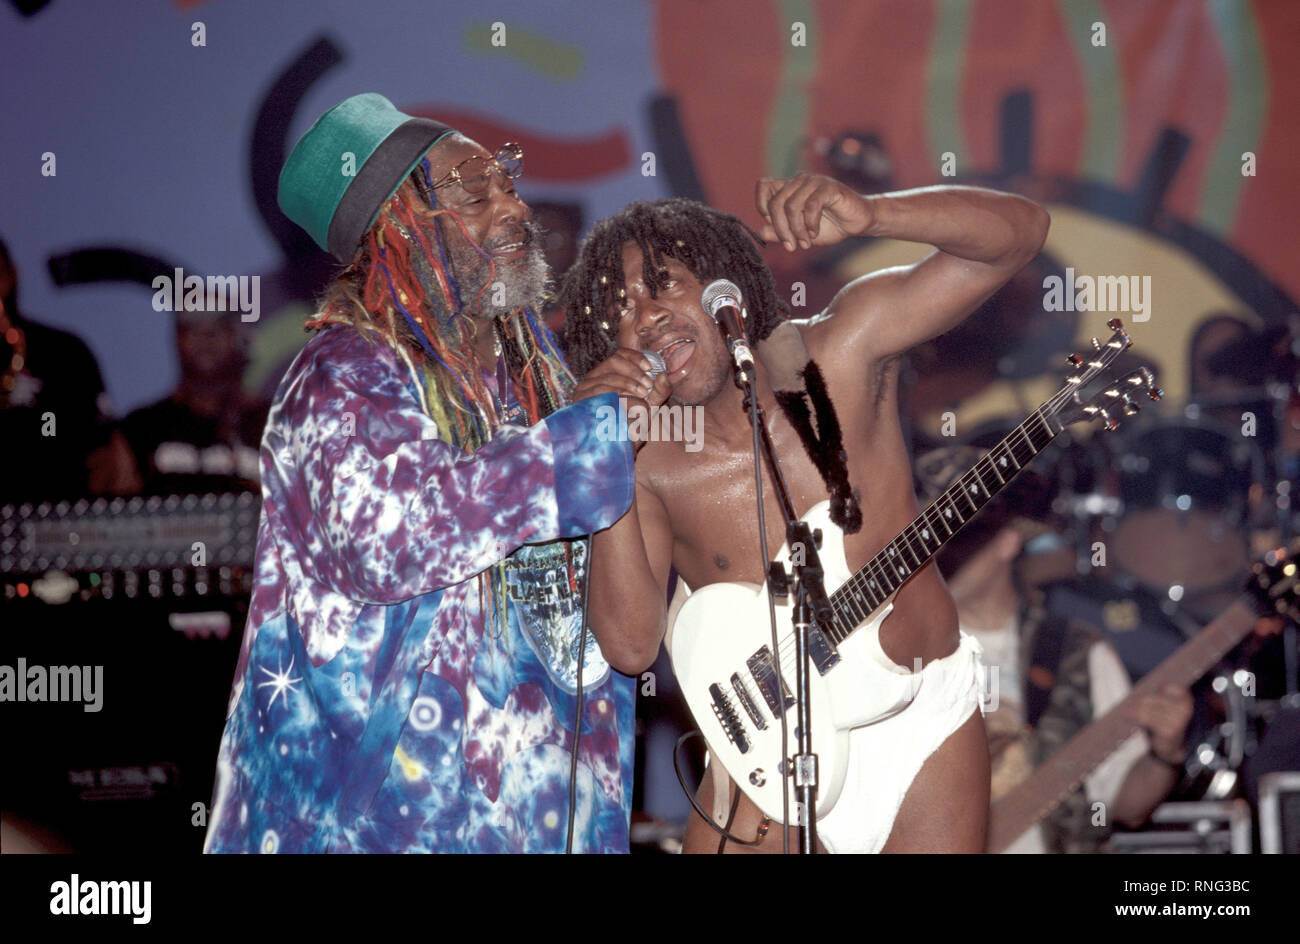 Guitarist in the George Clinton band is shown performing onstage during Woodstock '99. Stock Photo